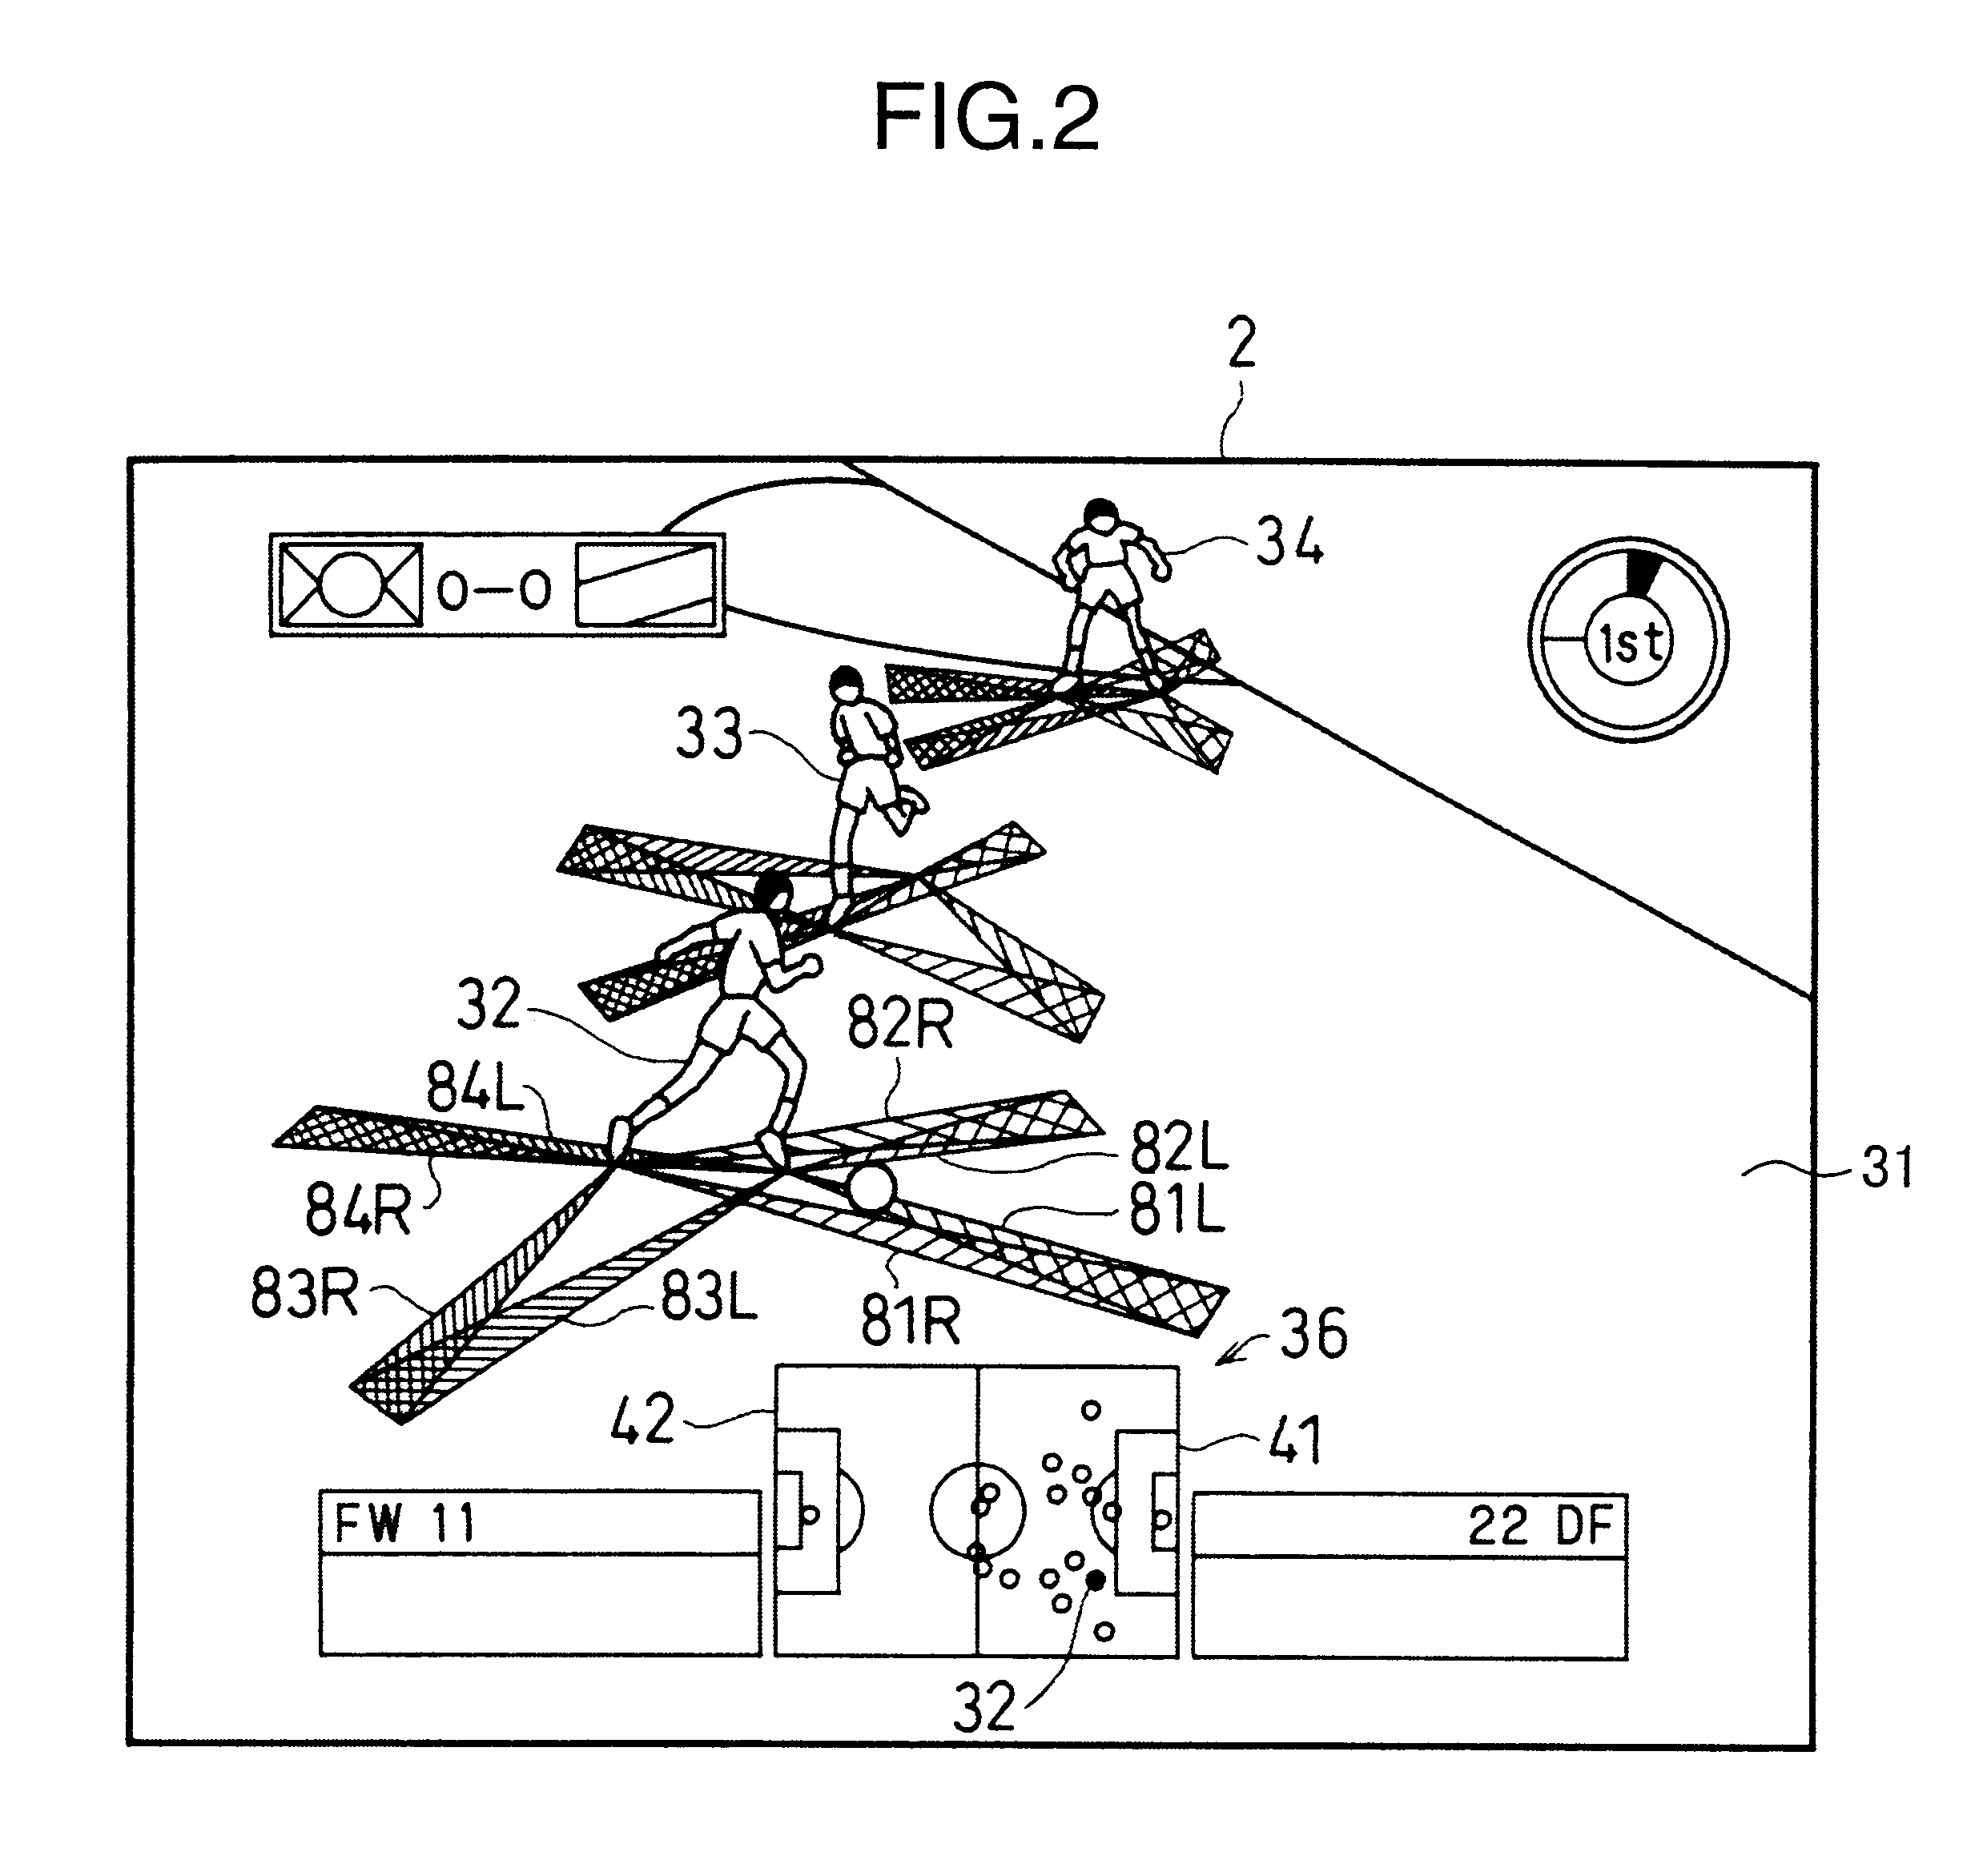 Image generating device, an image generating method, a readable storage medium storing an image generating program and a video game system